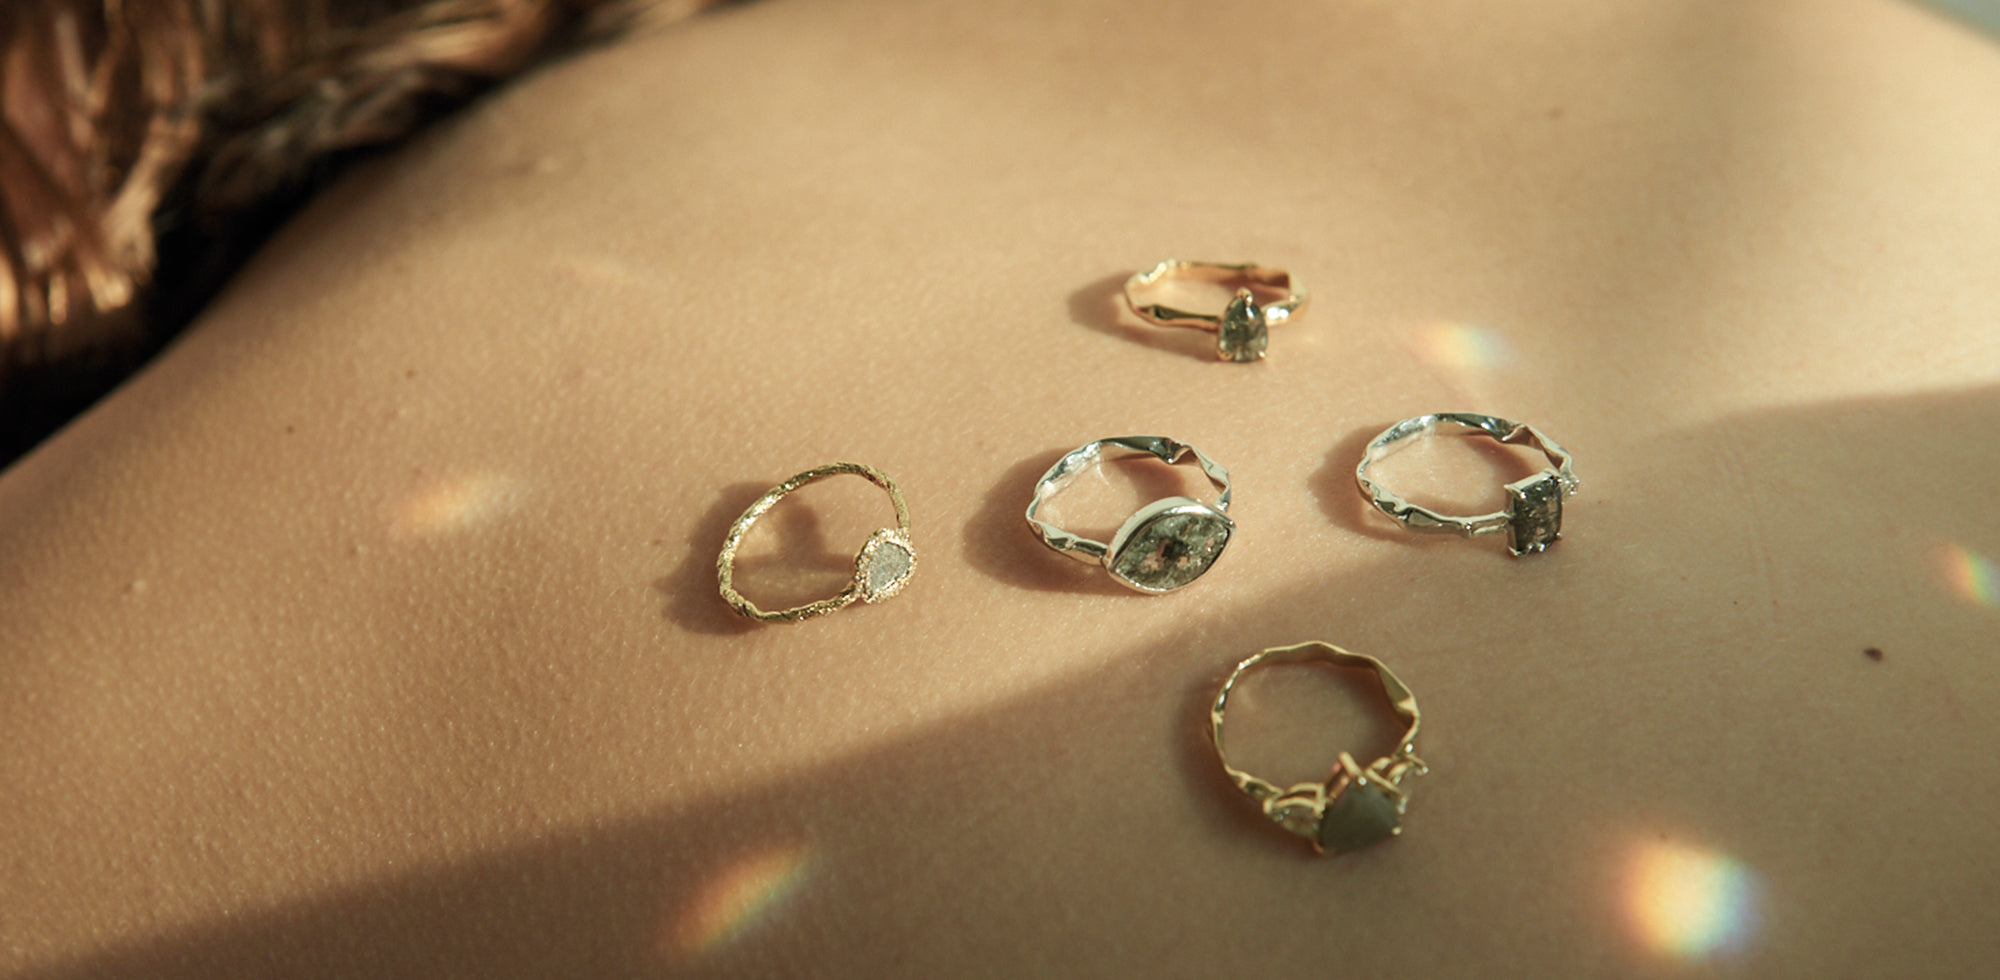 5 handmade gold rings against a sandy background